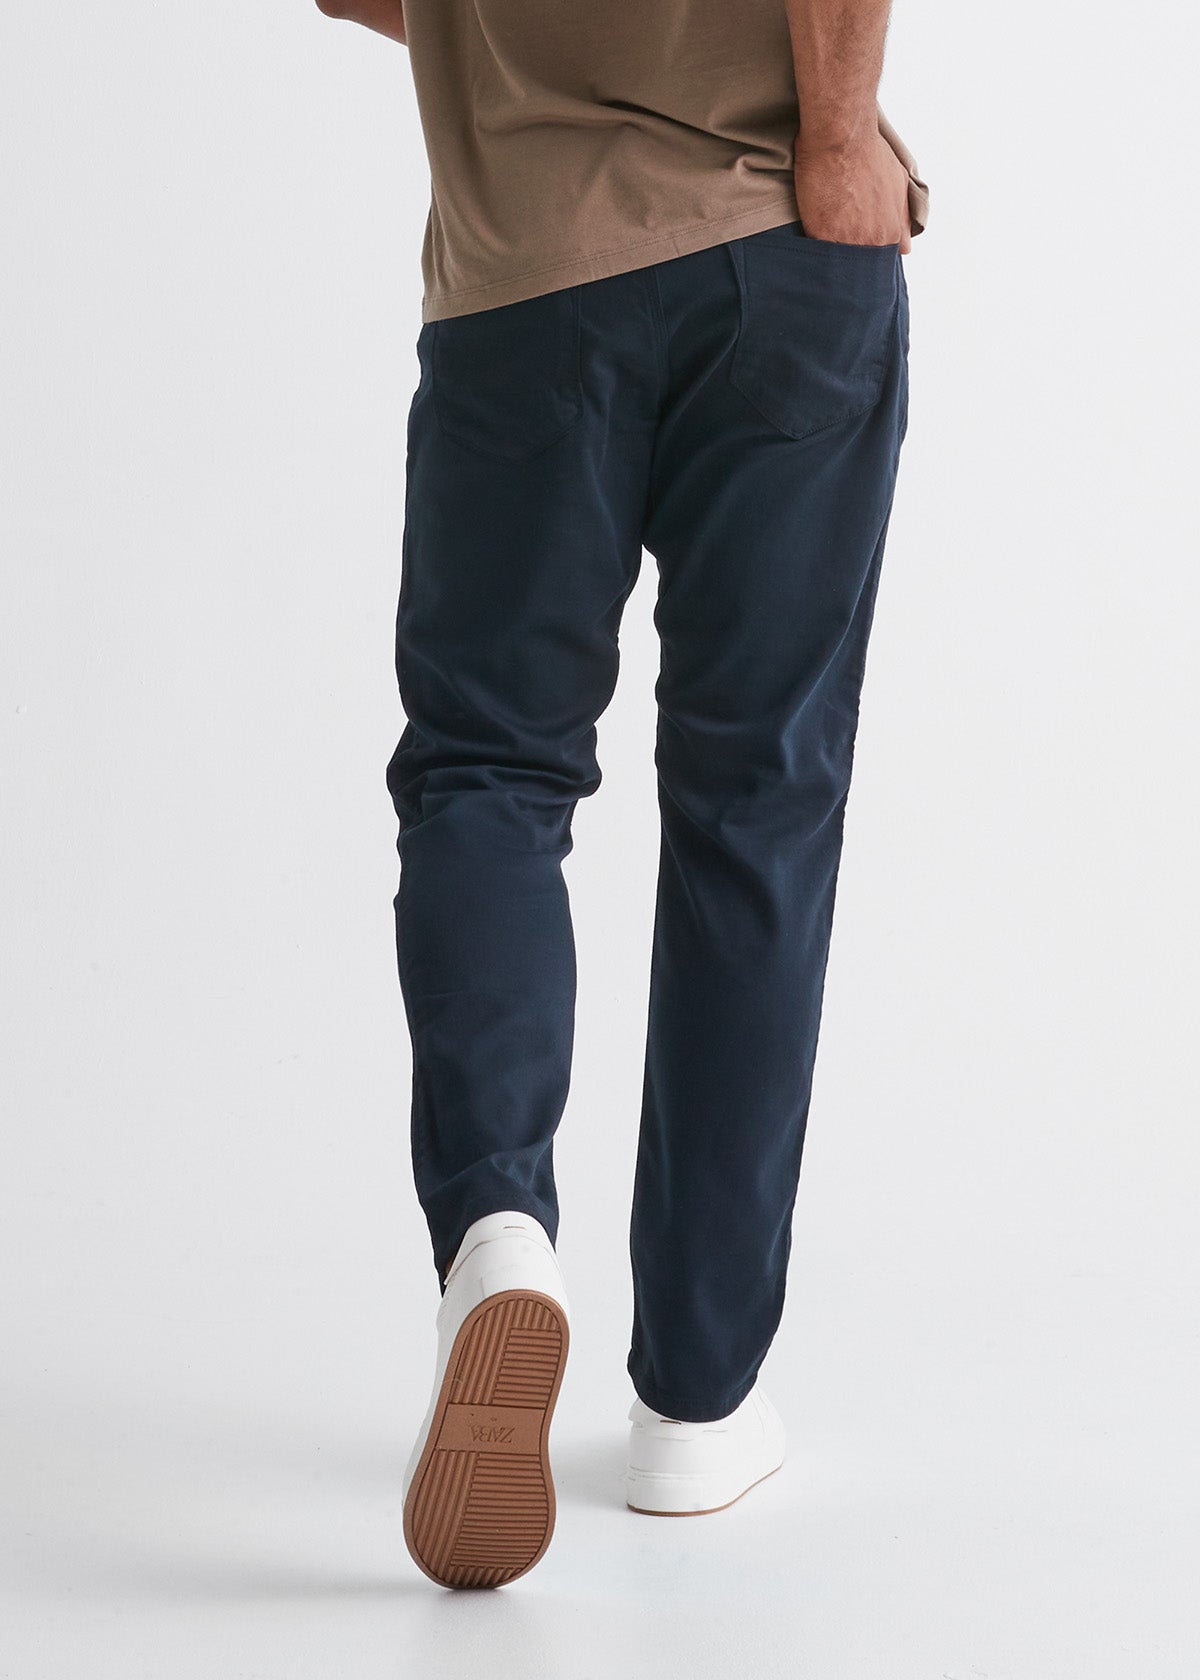 Men's Navy Blue Relaxed Fit Dress Sweatpant